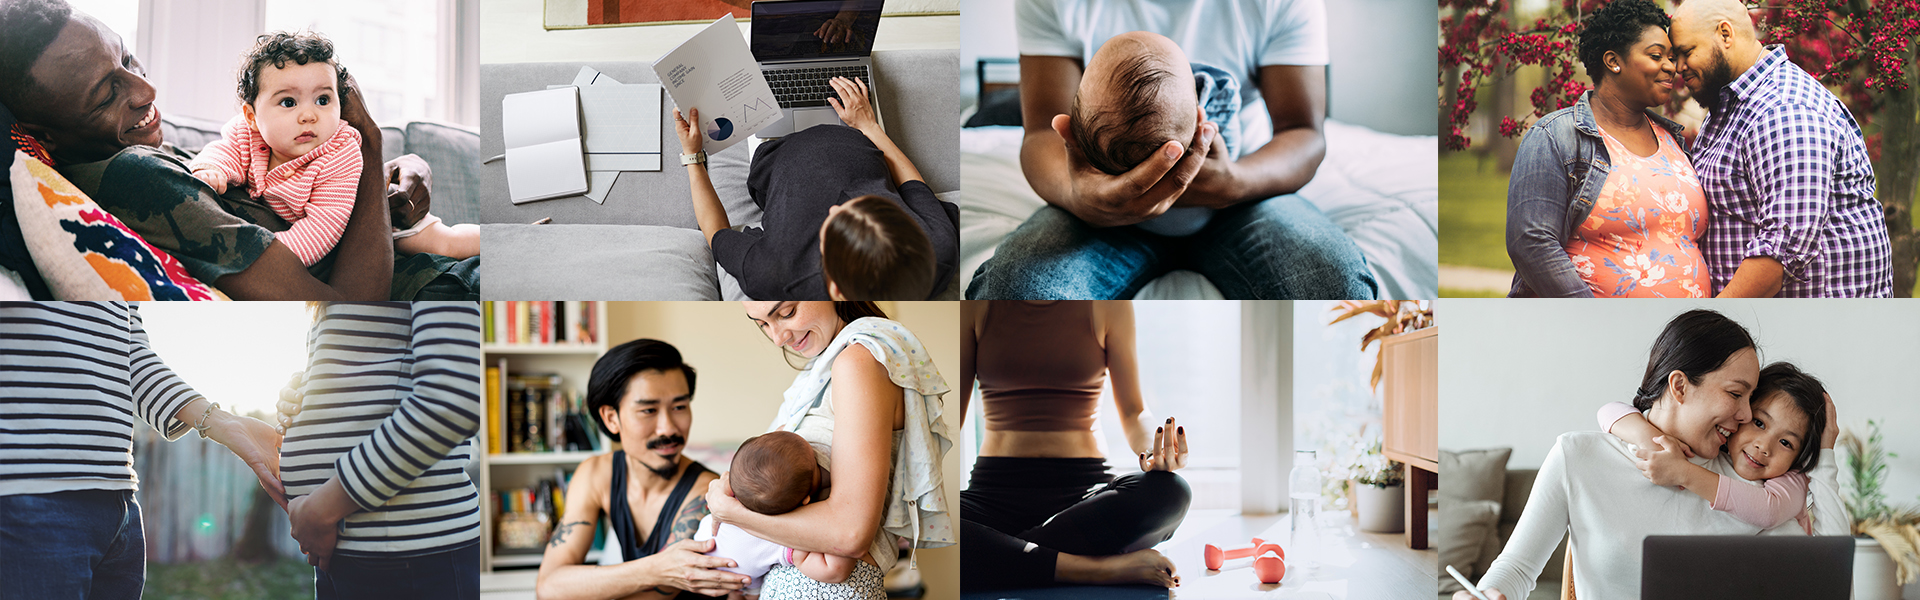 Grid-of-images-of-parents-and-children_wide-1